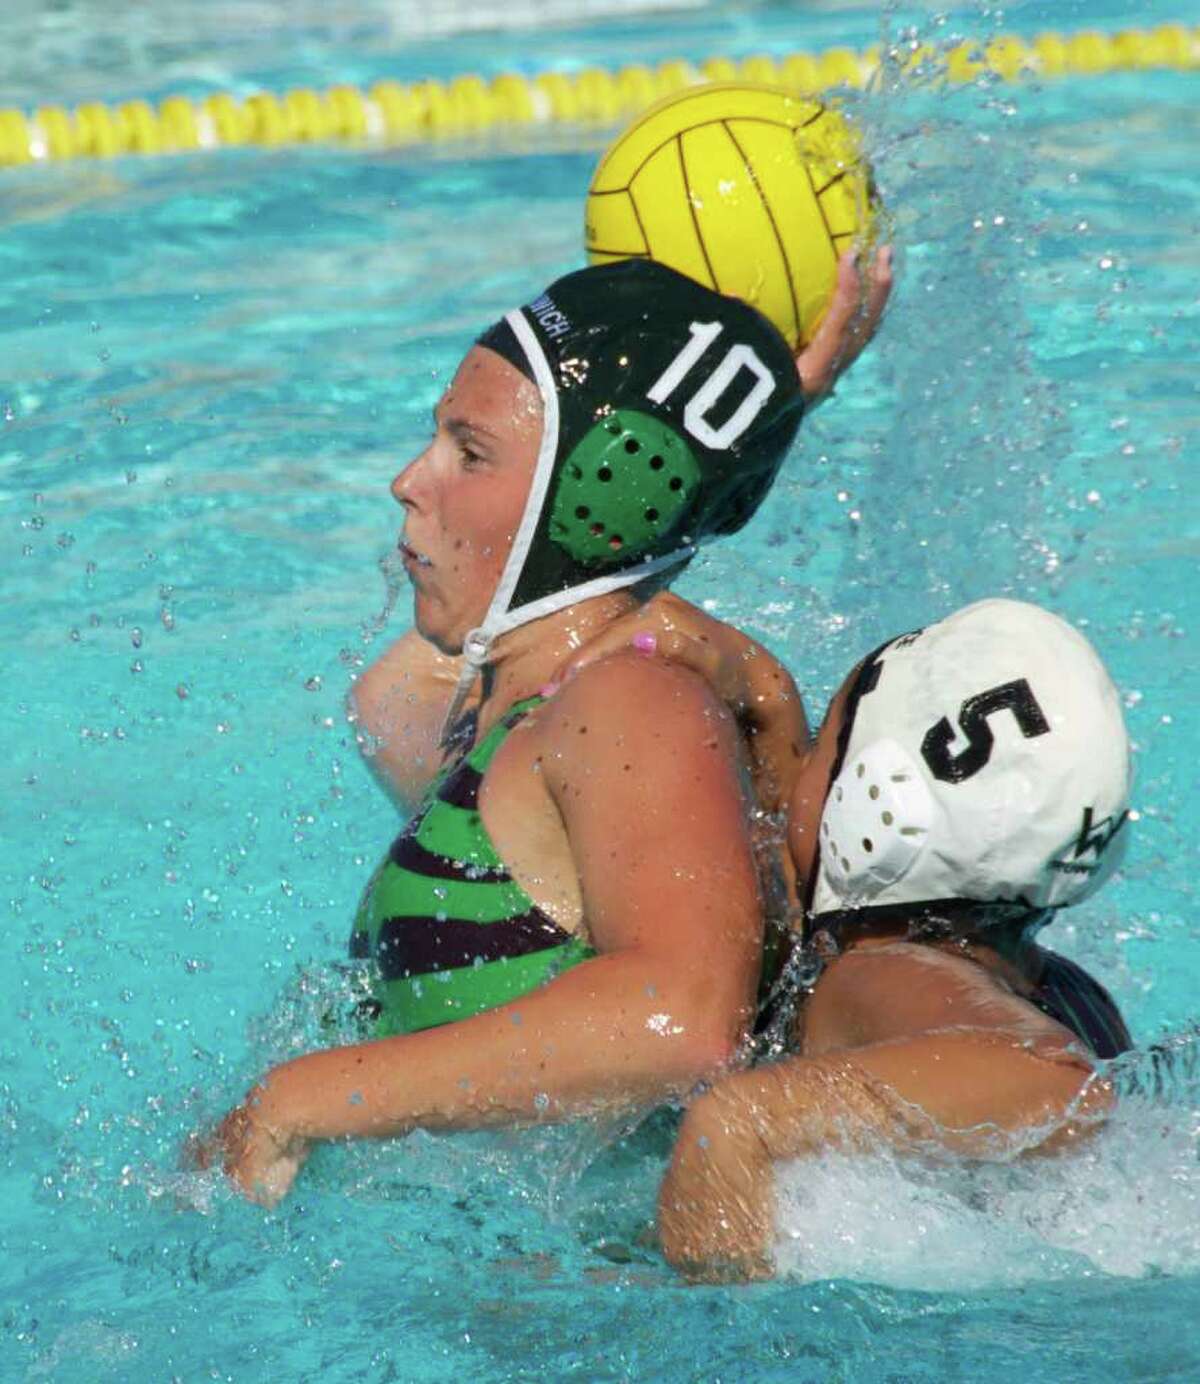 Paige Neary (#10) who had five goals in the GWP 14/under girls' 9-6 win over Los Angeles and two goals in their 8-6 win over the Elite Water Polo Club from Murrieta, CA.